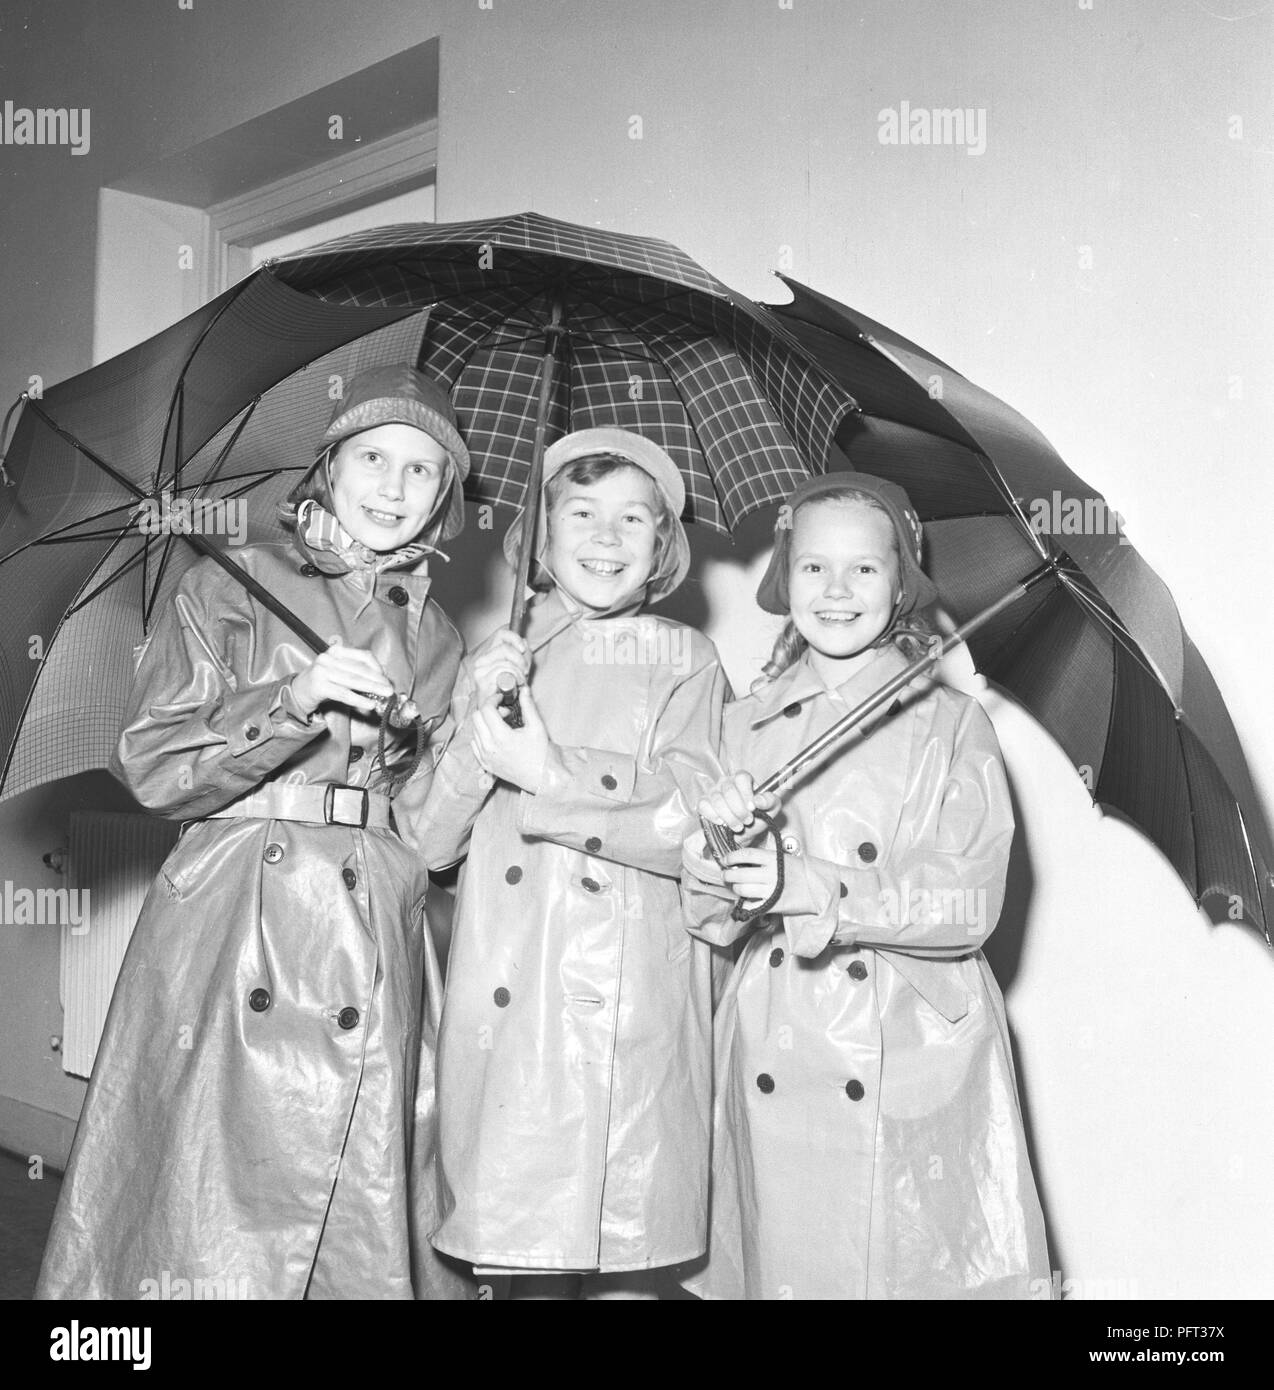 1950s children in rain clothes. Three children are standing togetherdressed in rain coats and rubber holding umbrellas. Sweden November 1952 Stock Photo